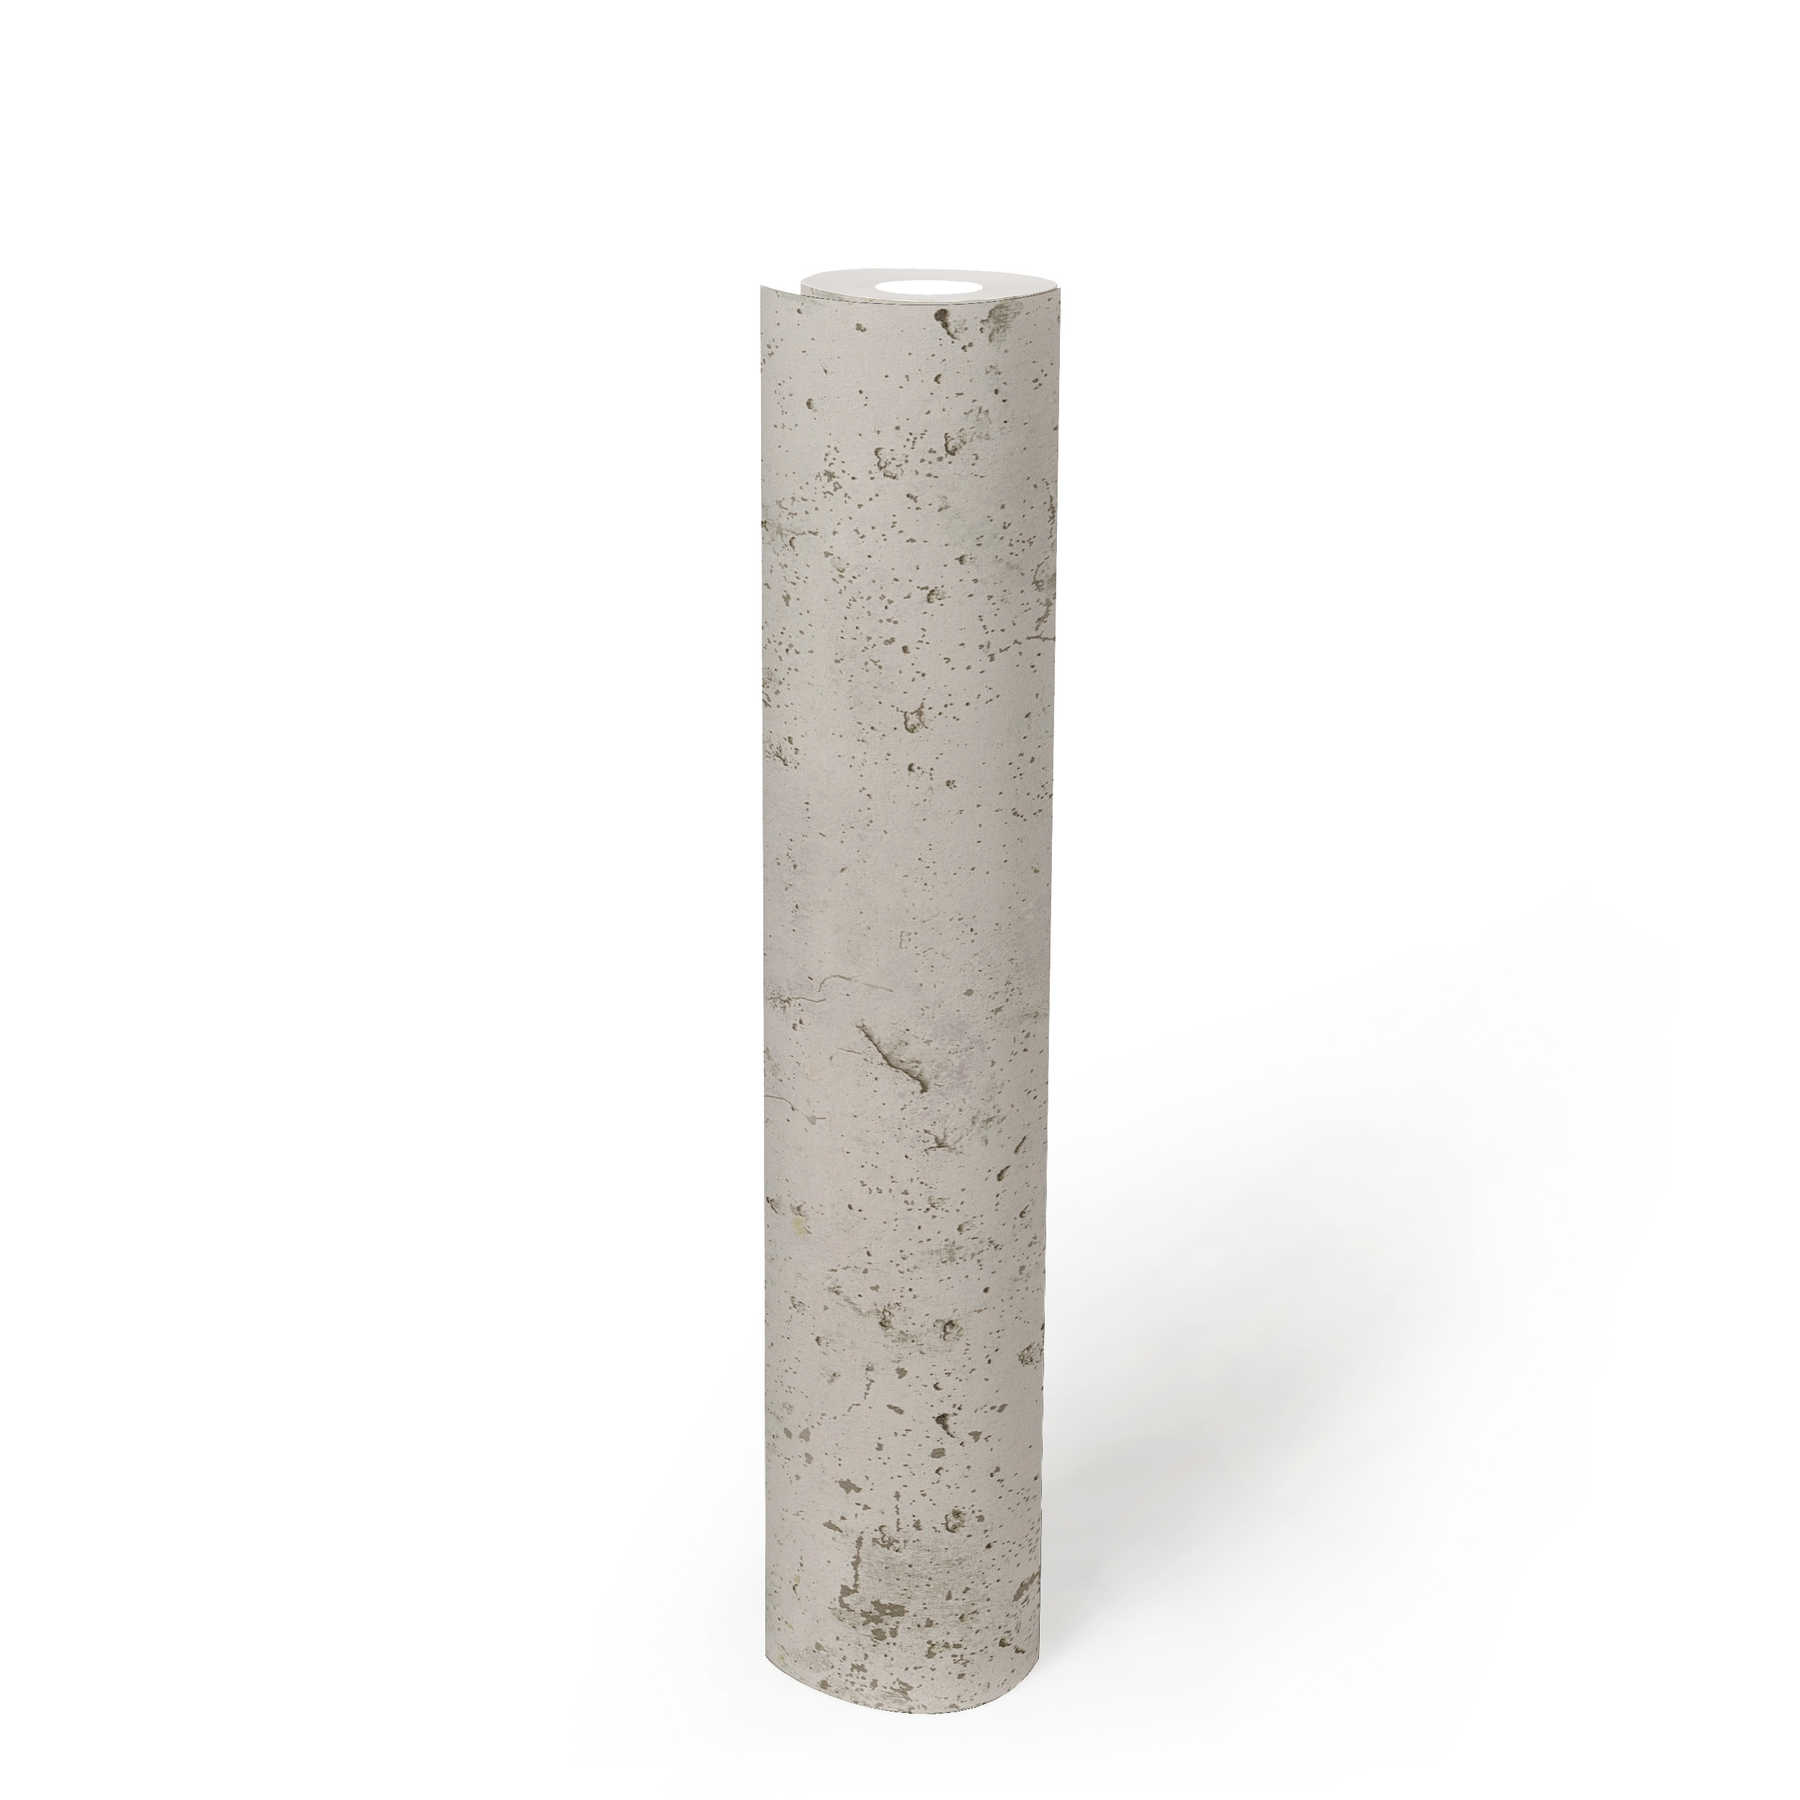             Concrete wallpaper in industrial style - grey
        